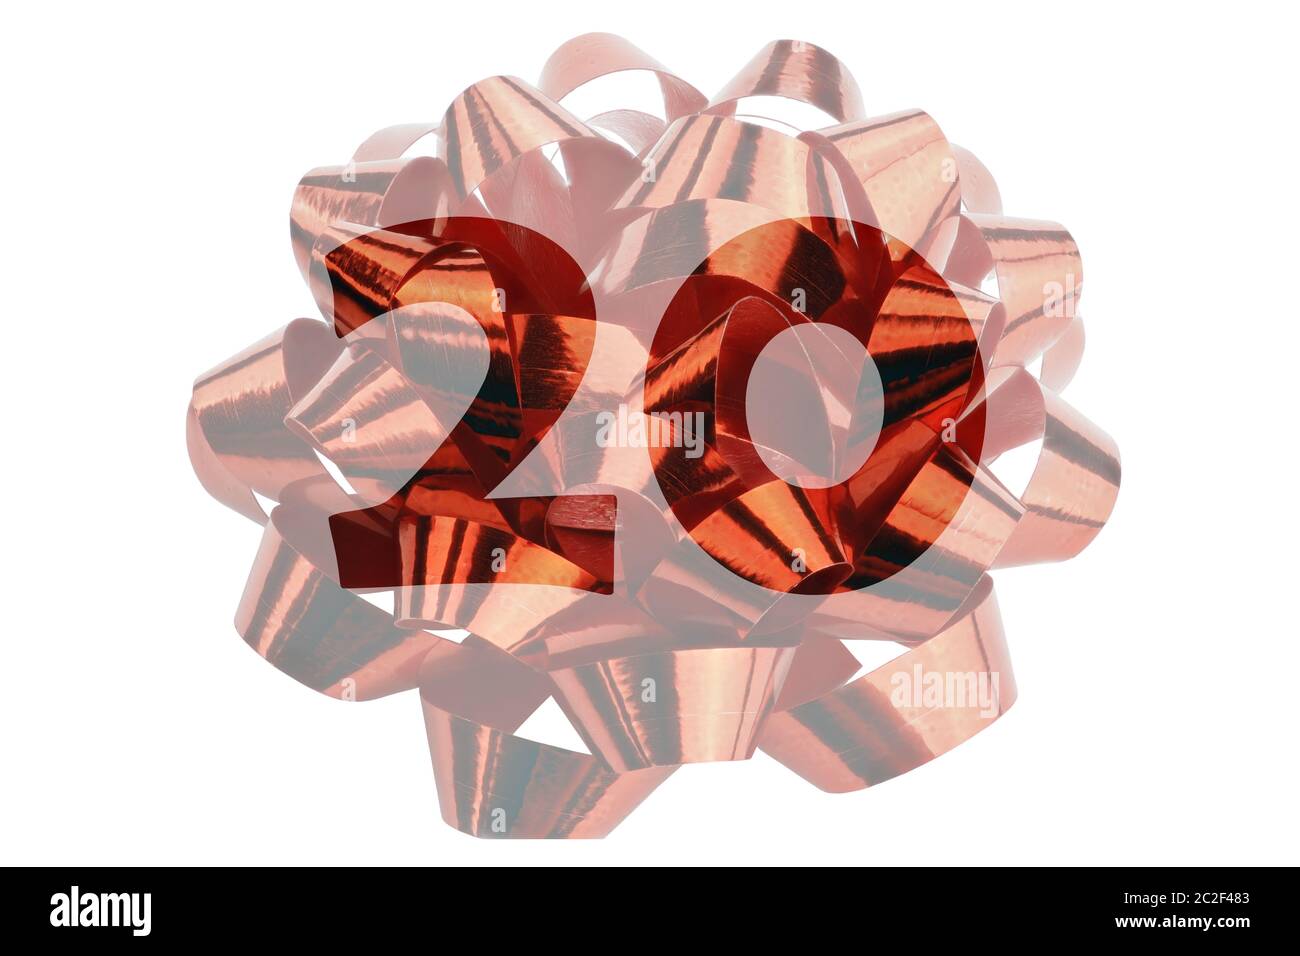 Image of a lightened gift loop made of red gift ribbon with transparent number 20 in original color Stock Photo